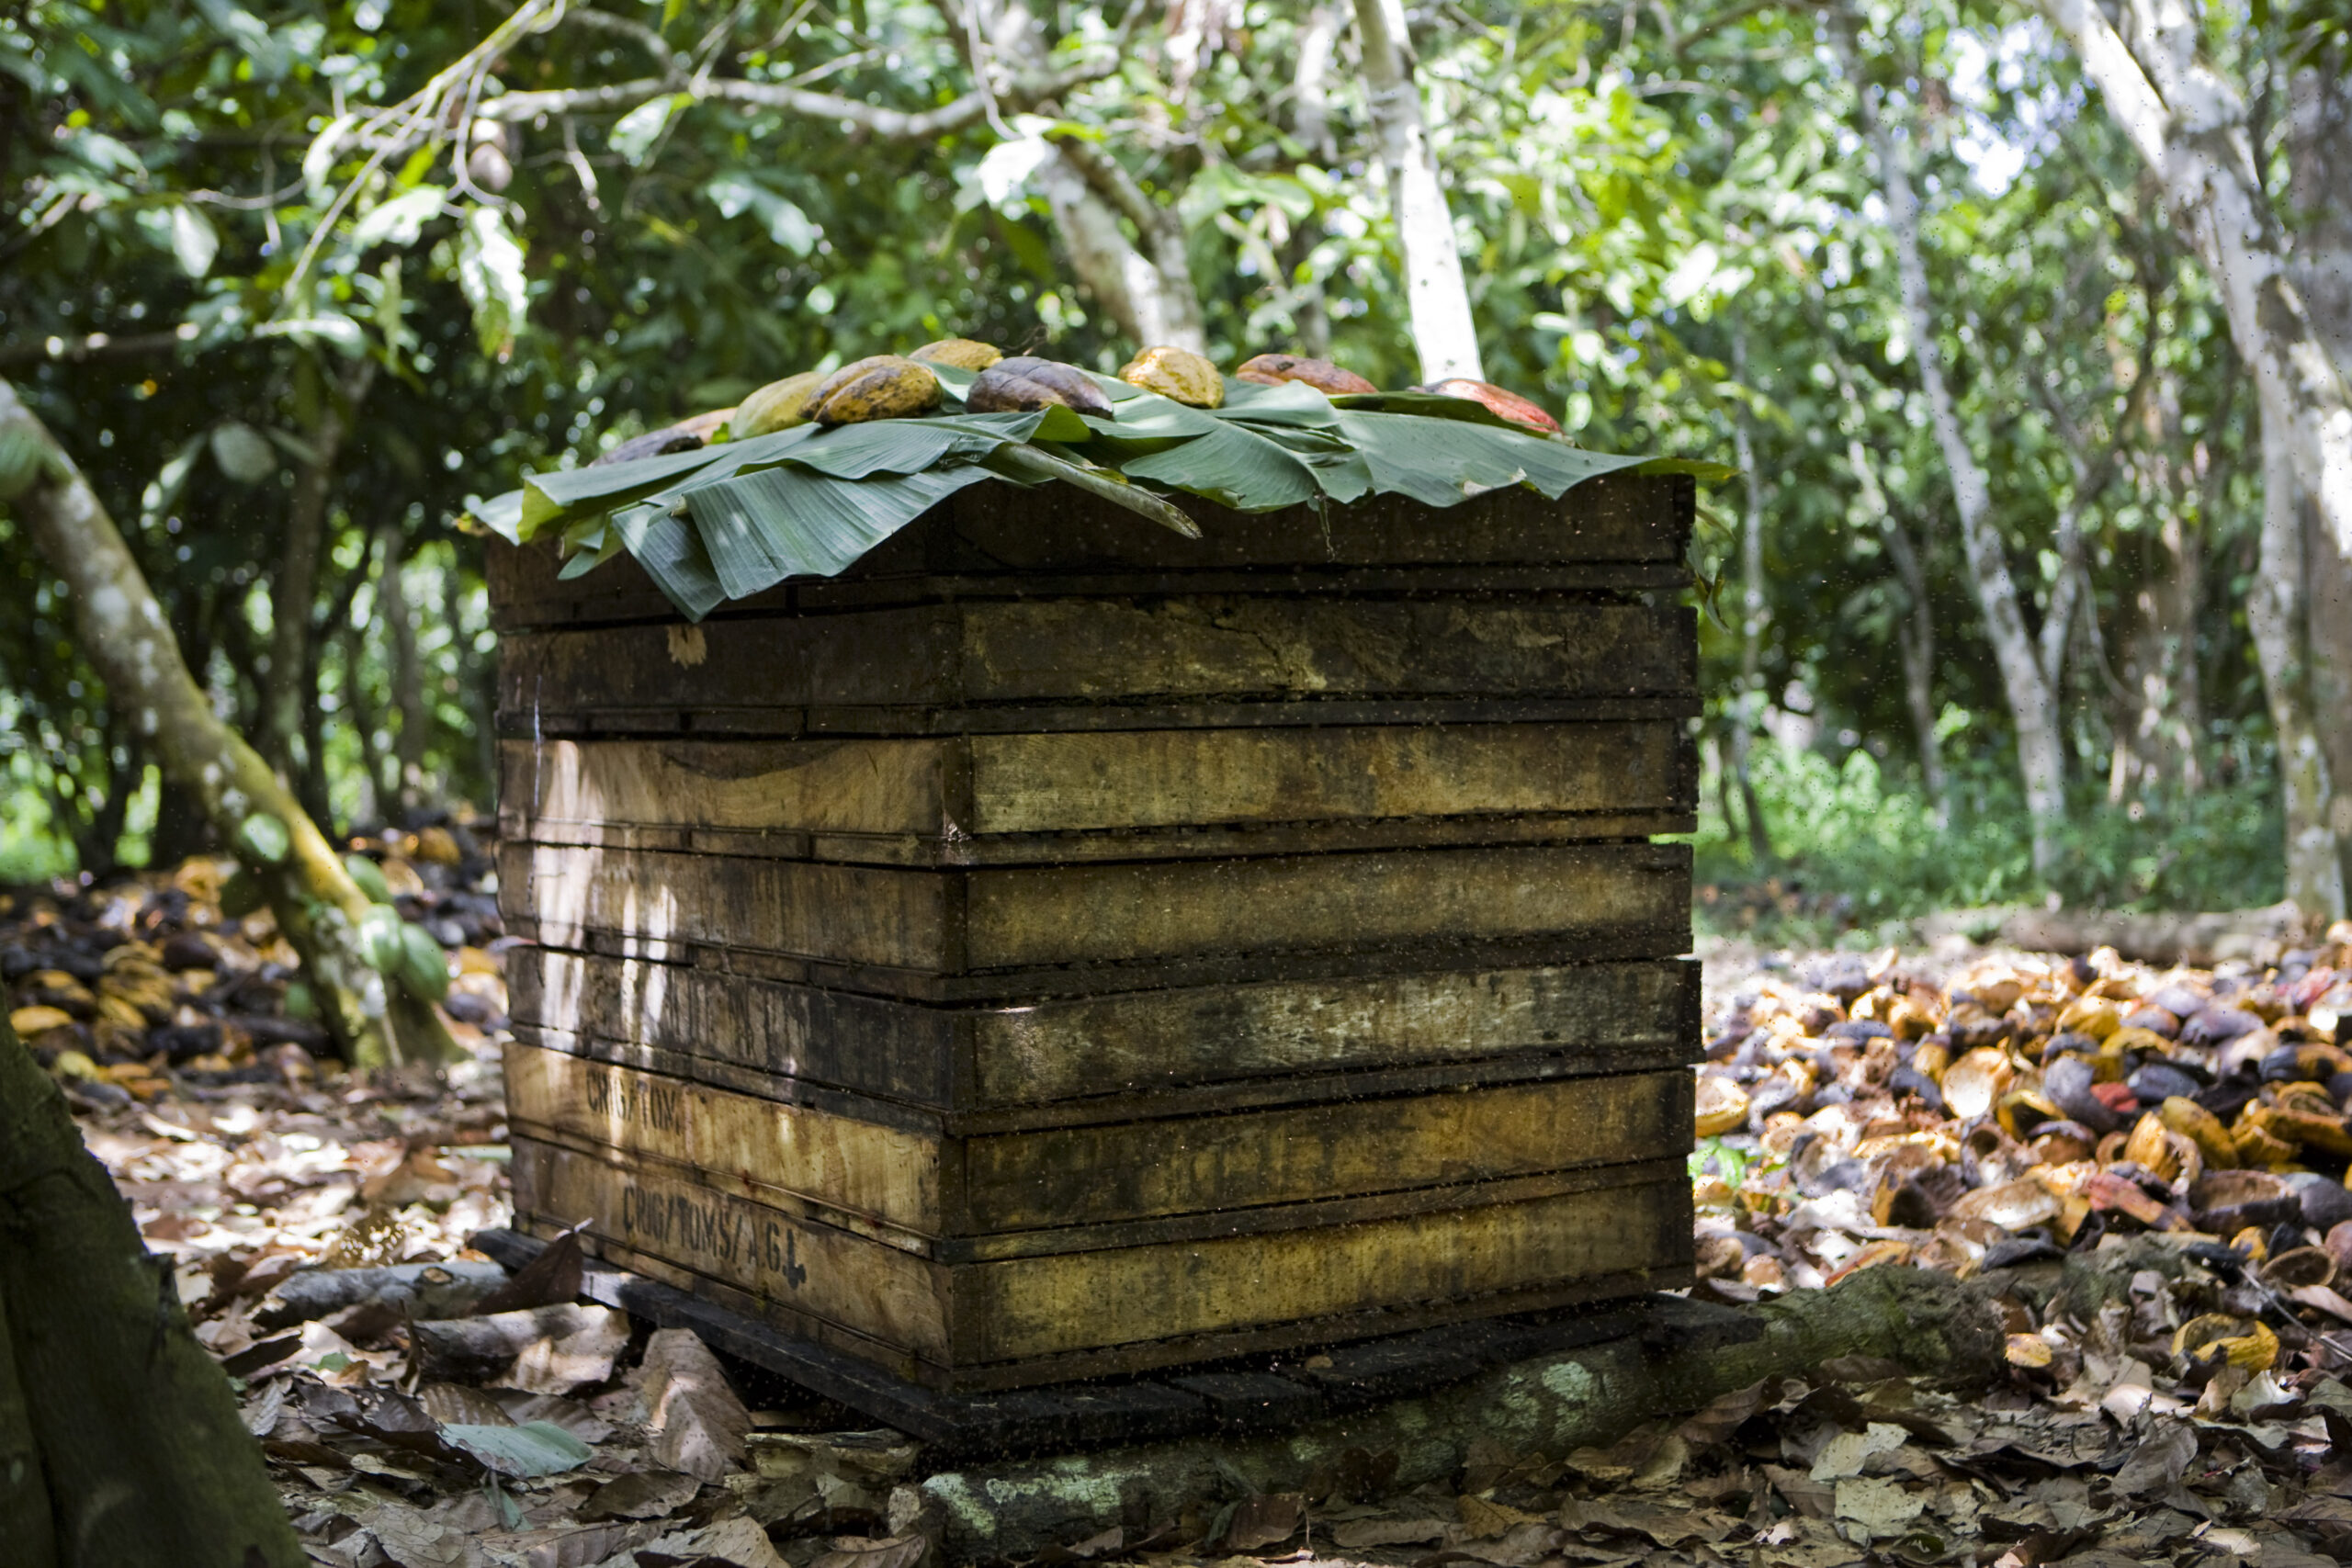 A wooden crate covered in banana leaves used to ferment cacao seeds.